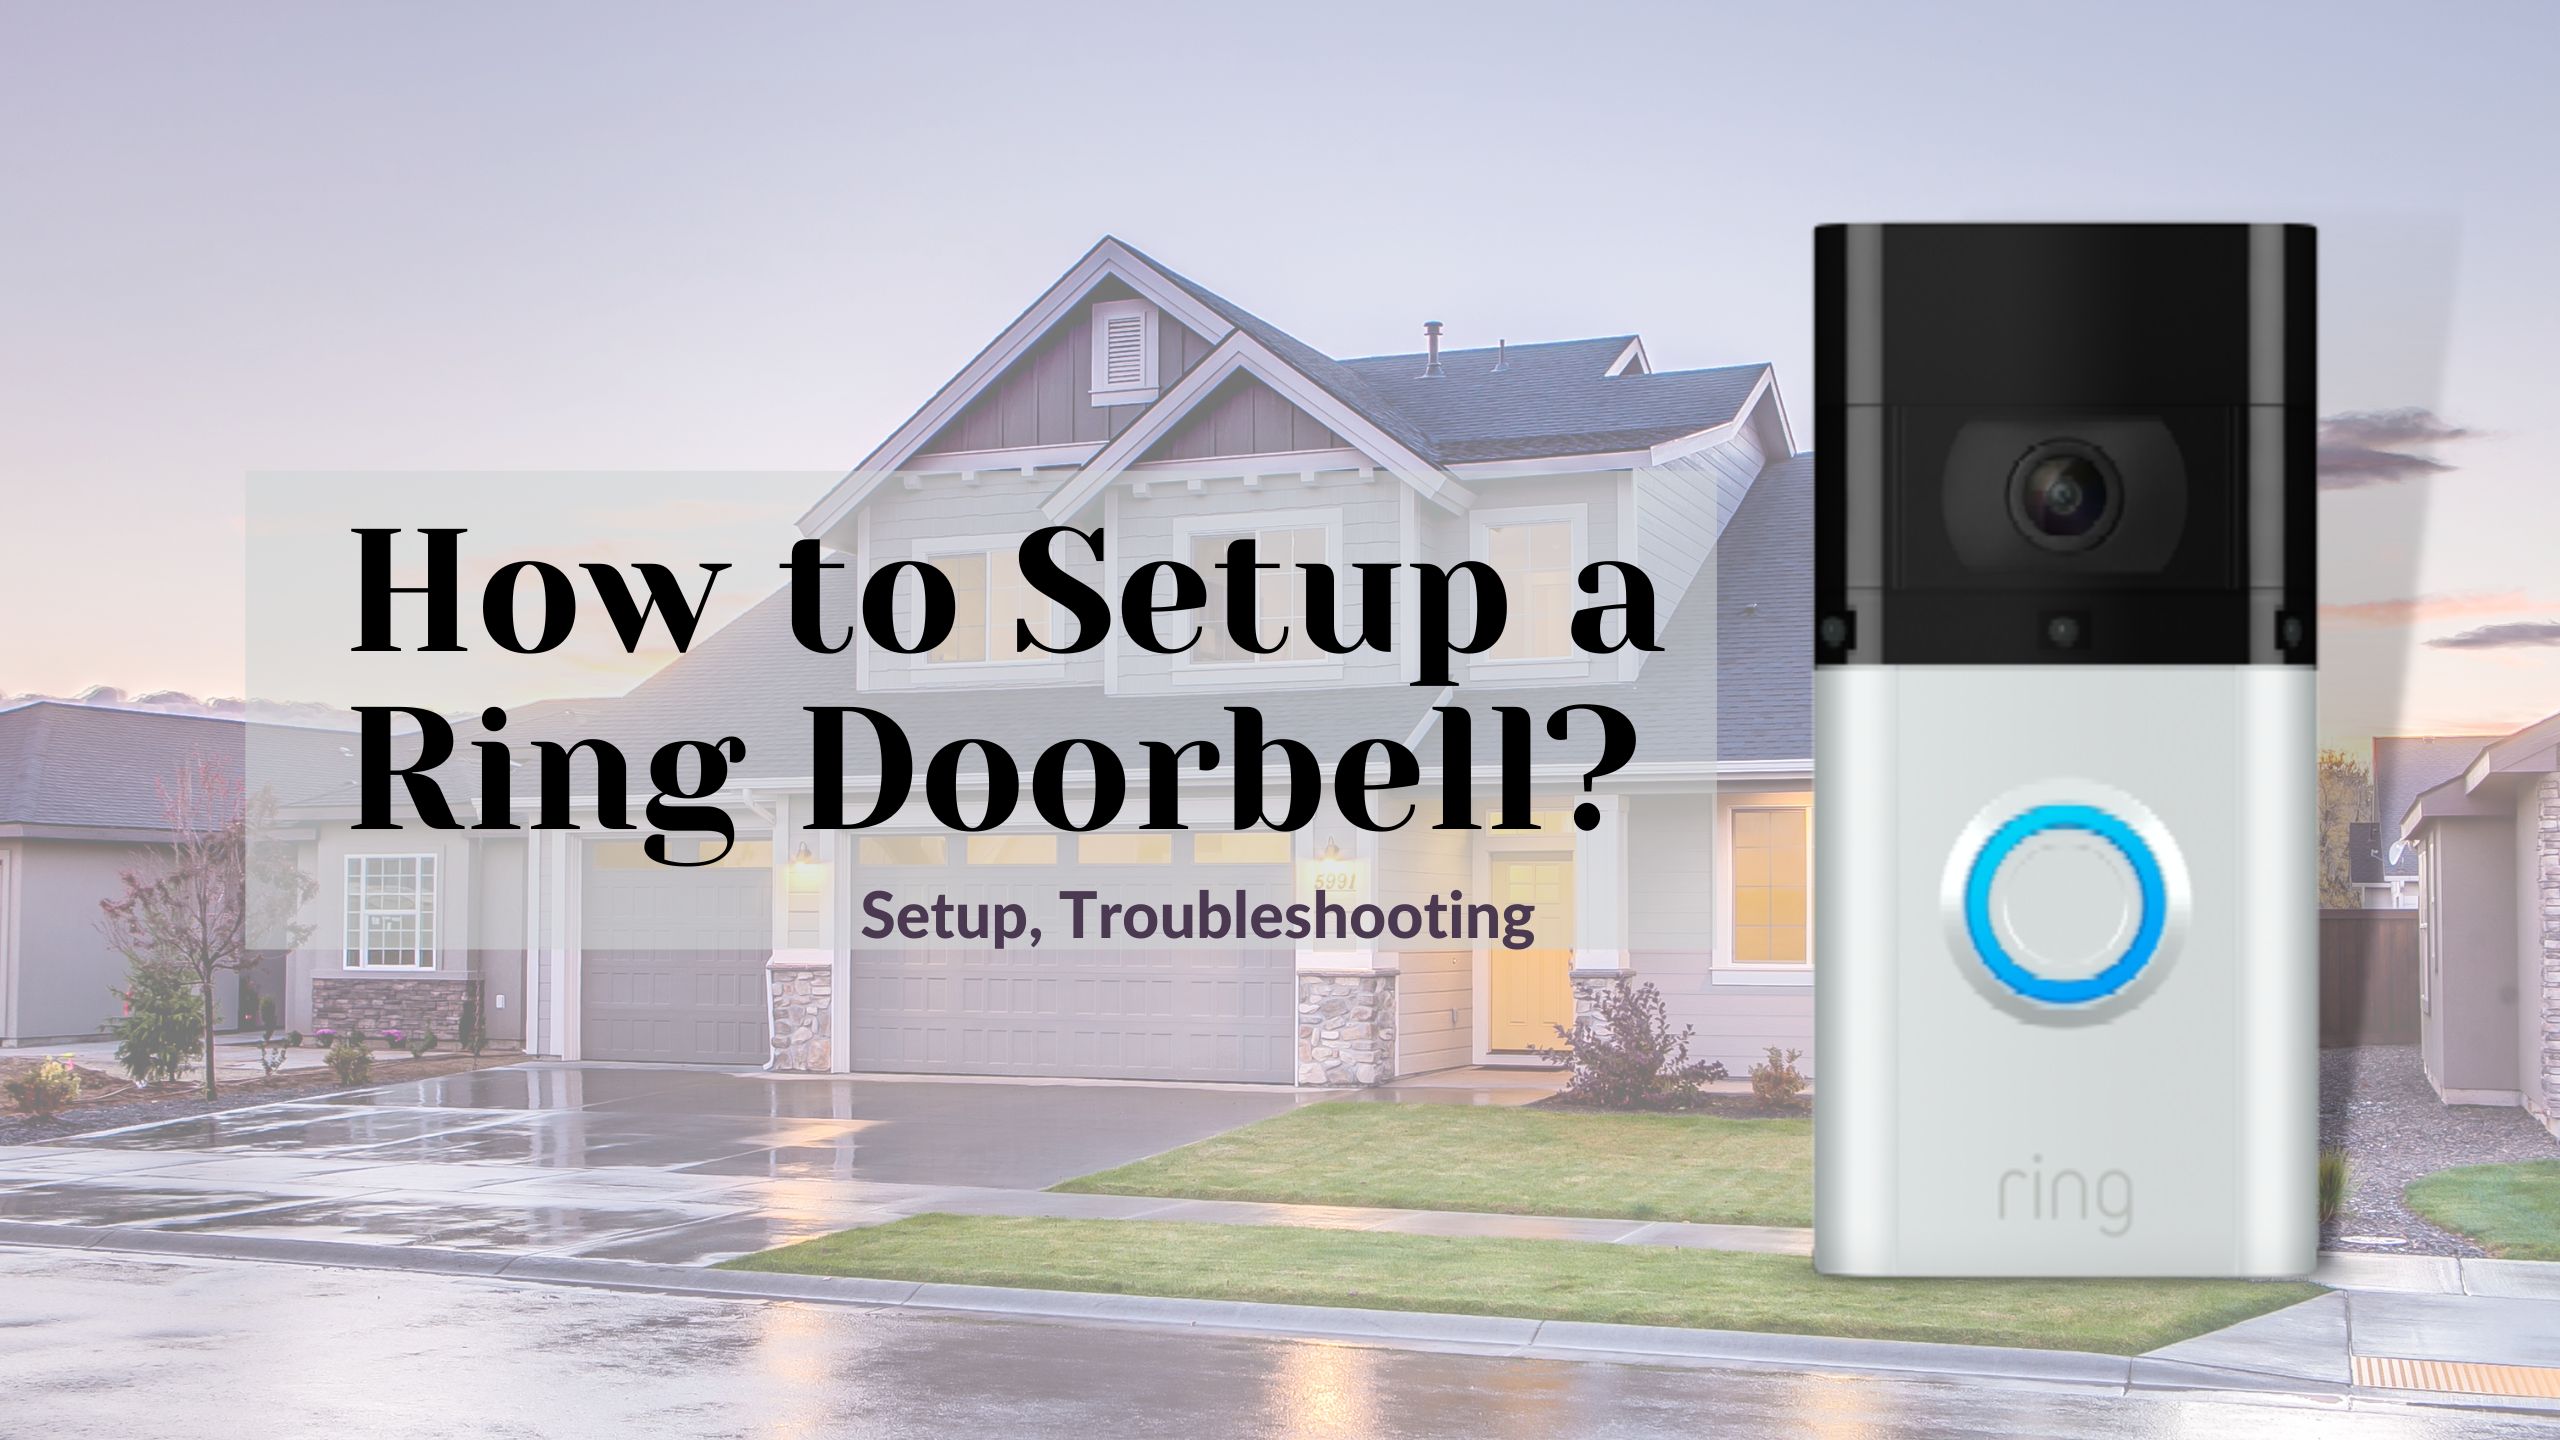 How to Setup a Ring Doorbell?